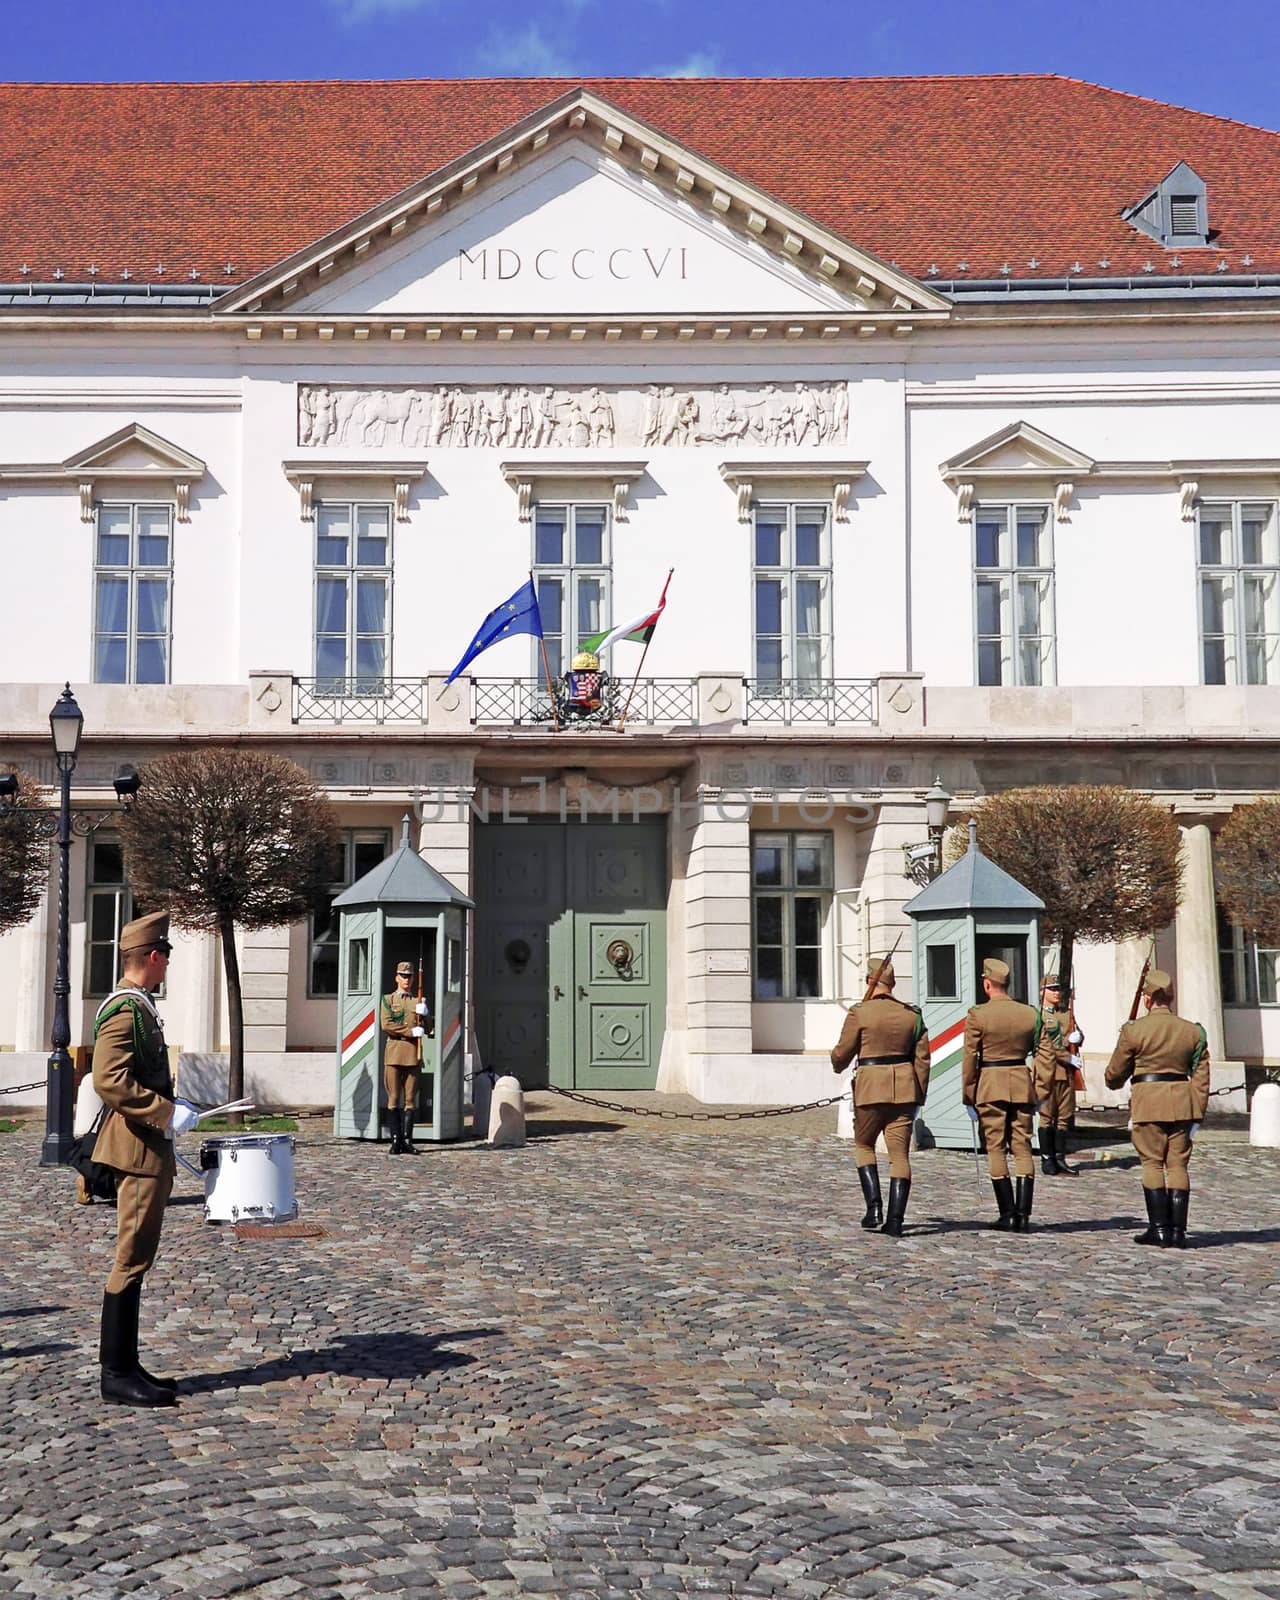 Budapest, Hungary - March 03, 2014 : Presidential guard Budapest, Hungary. Hungary's presidential office in the Castle District is heavily guarded by presidential guards.